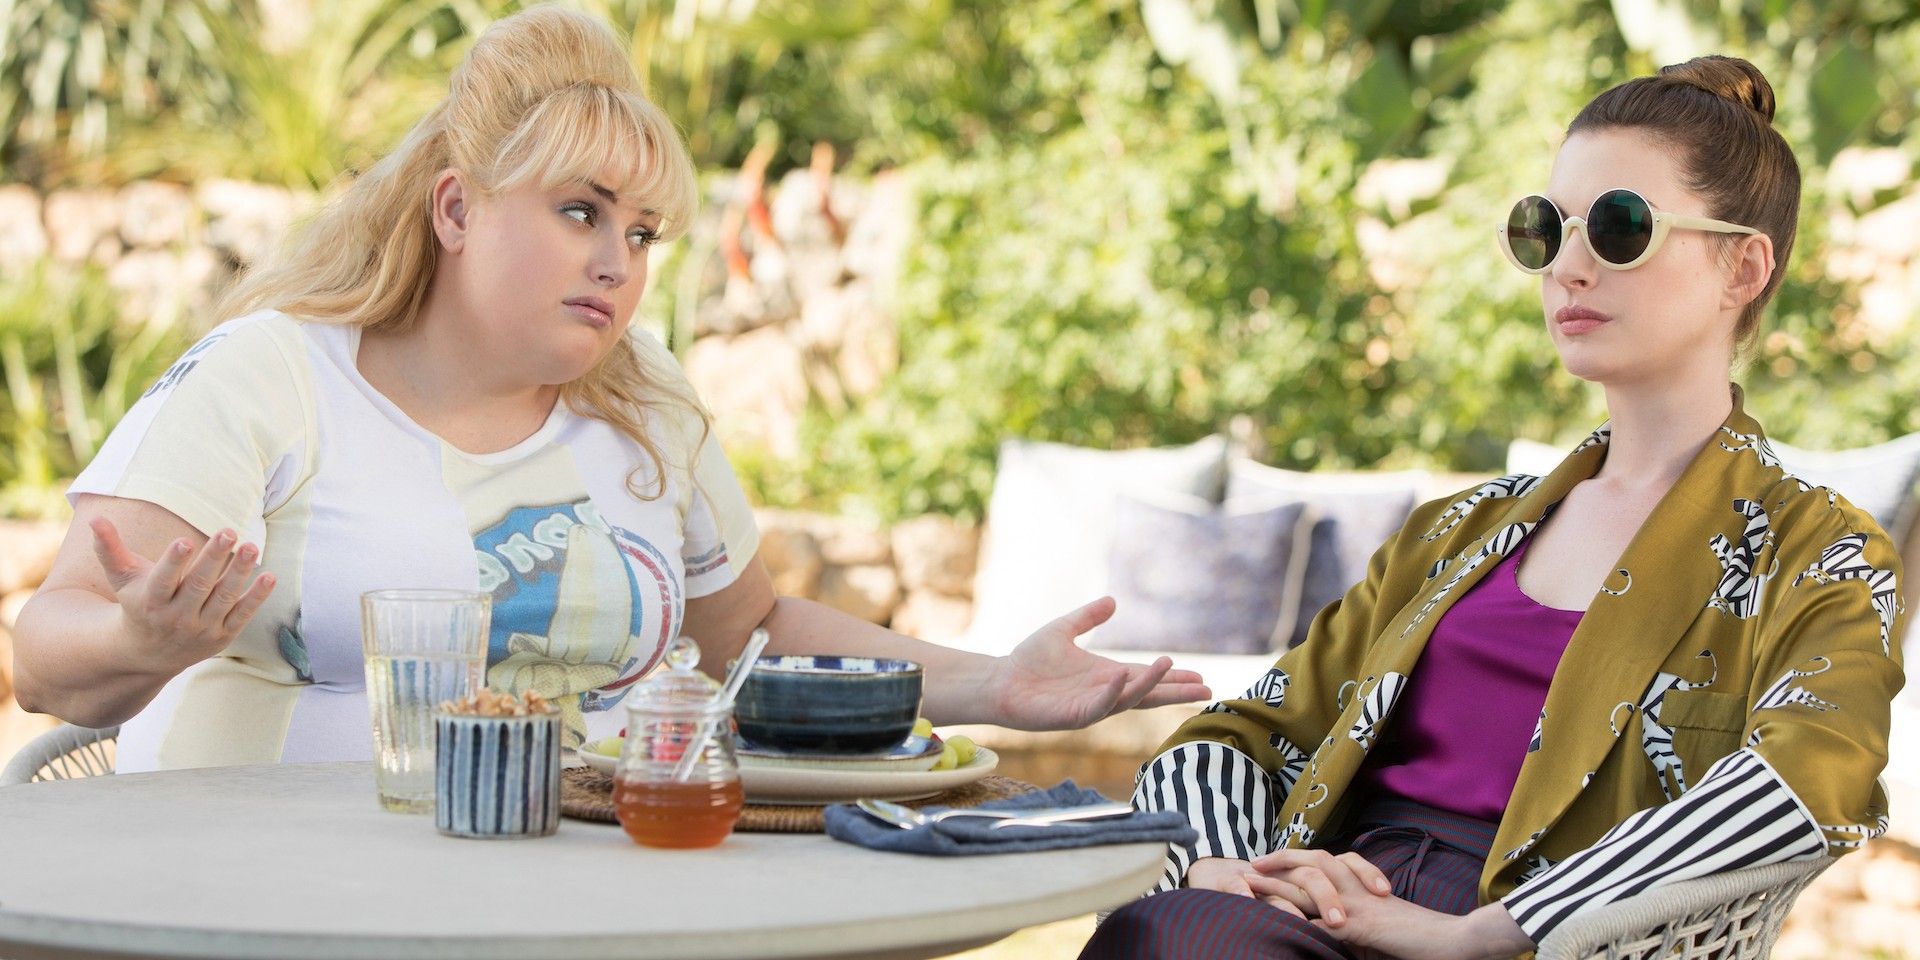 Rebel Wilson and Anne Hathaway in The Hustle